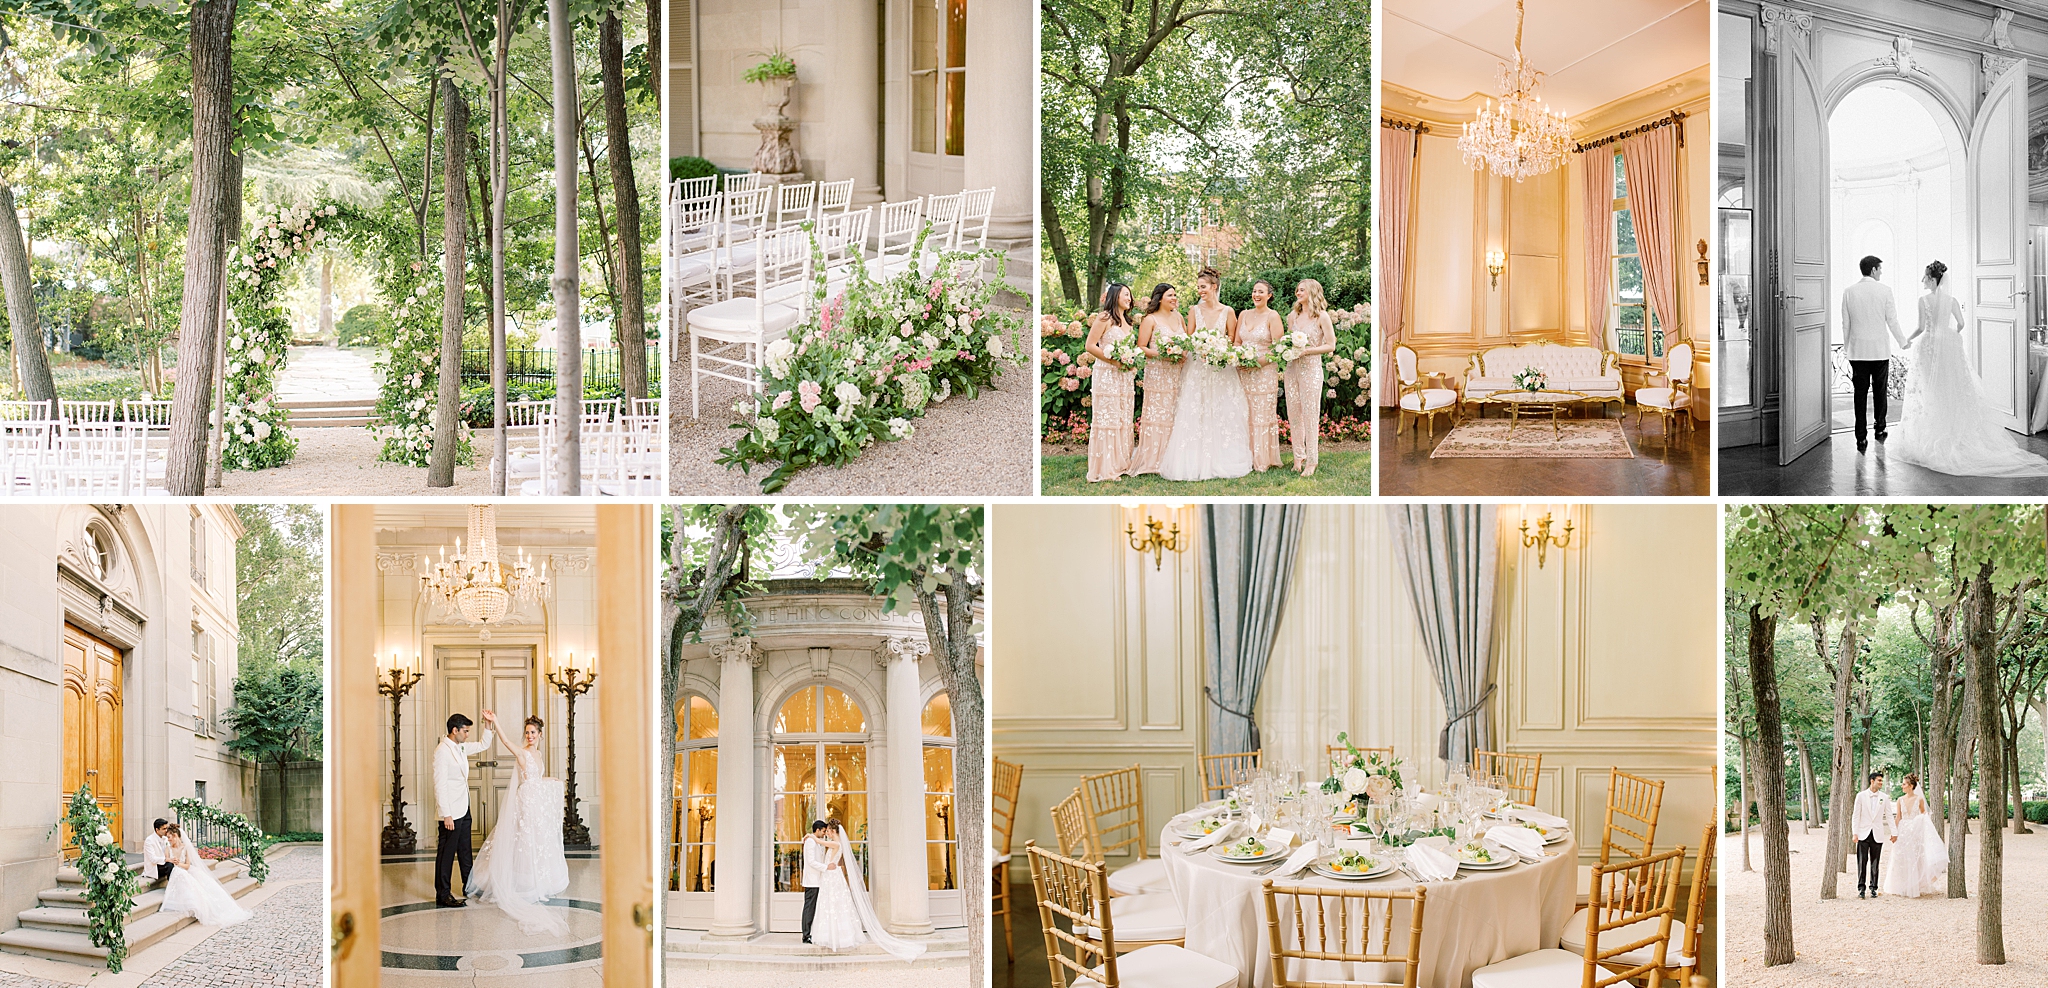 Black Tie Wedding at the Meridian House in Washington, DC